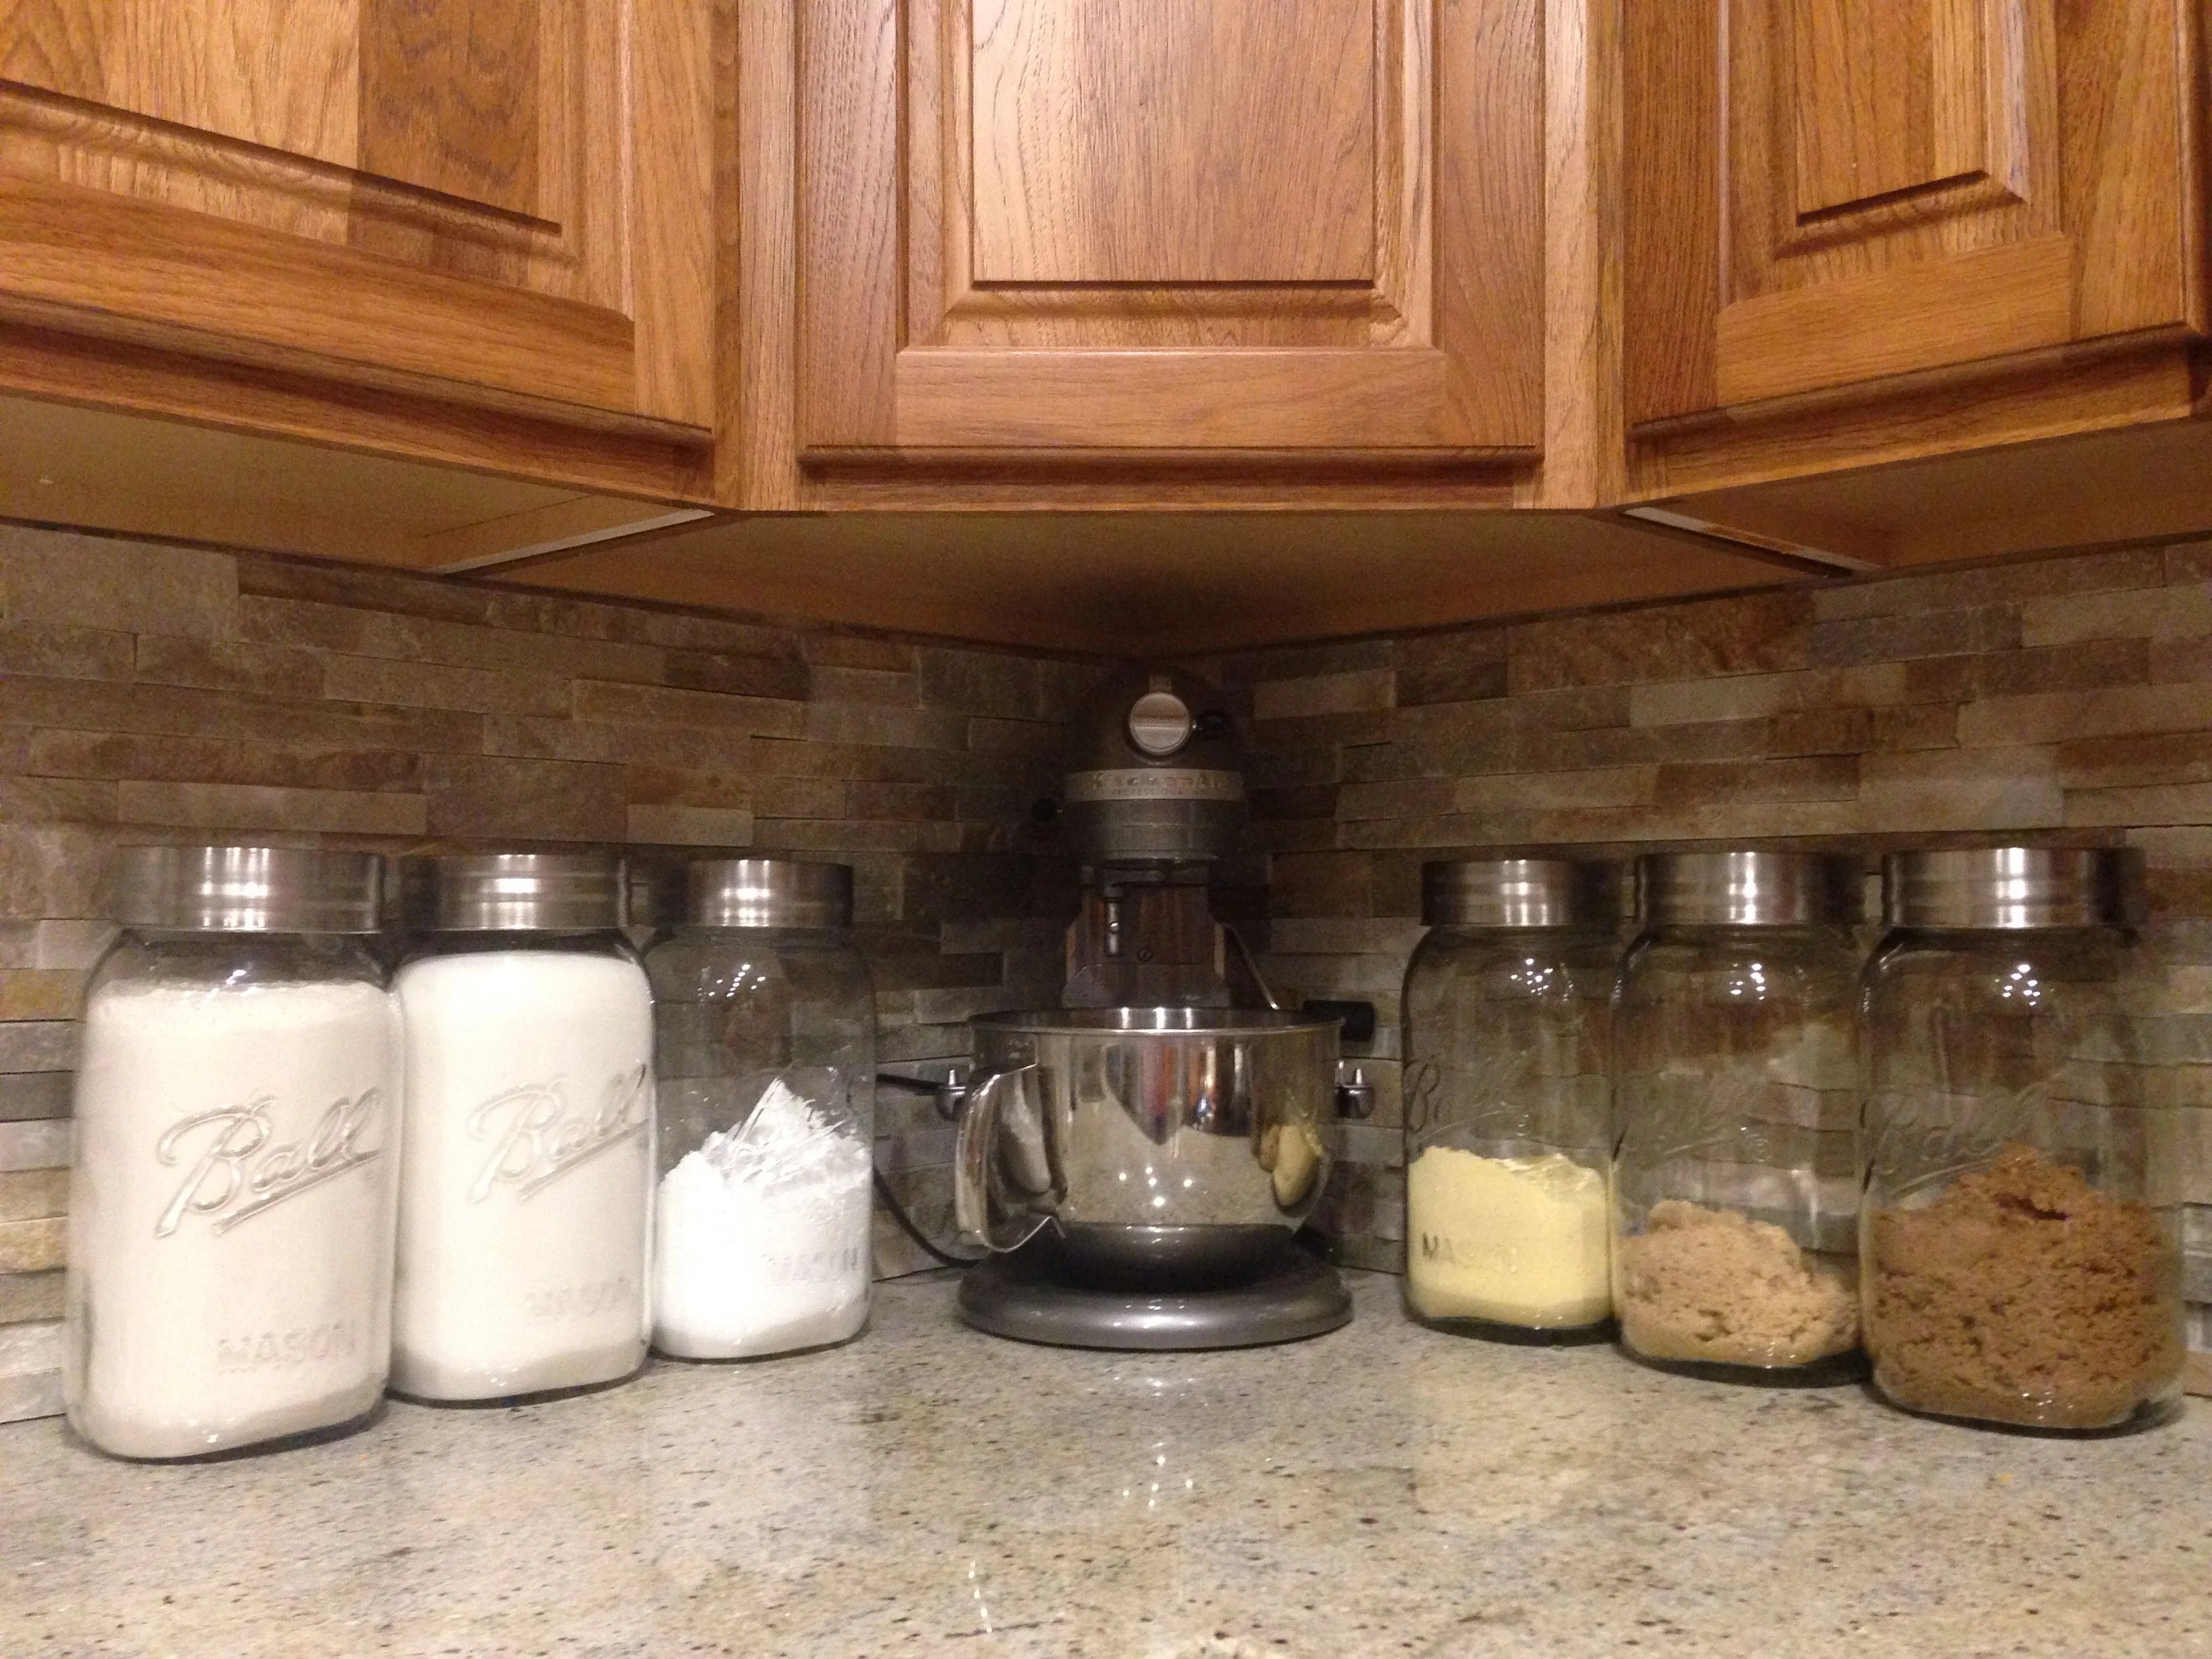 A kitchen countertop with labeled jars containing baking ingredients and a stand mixer.